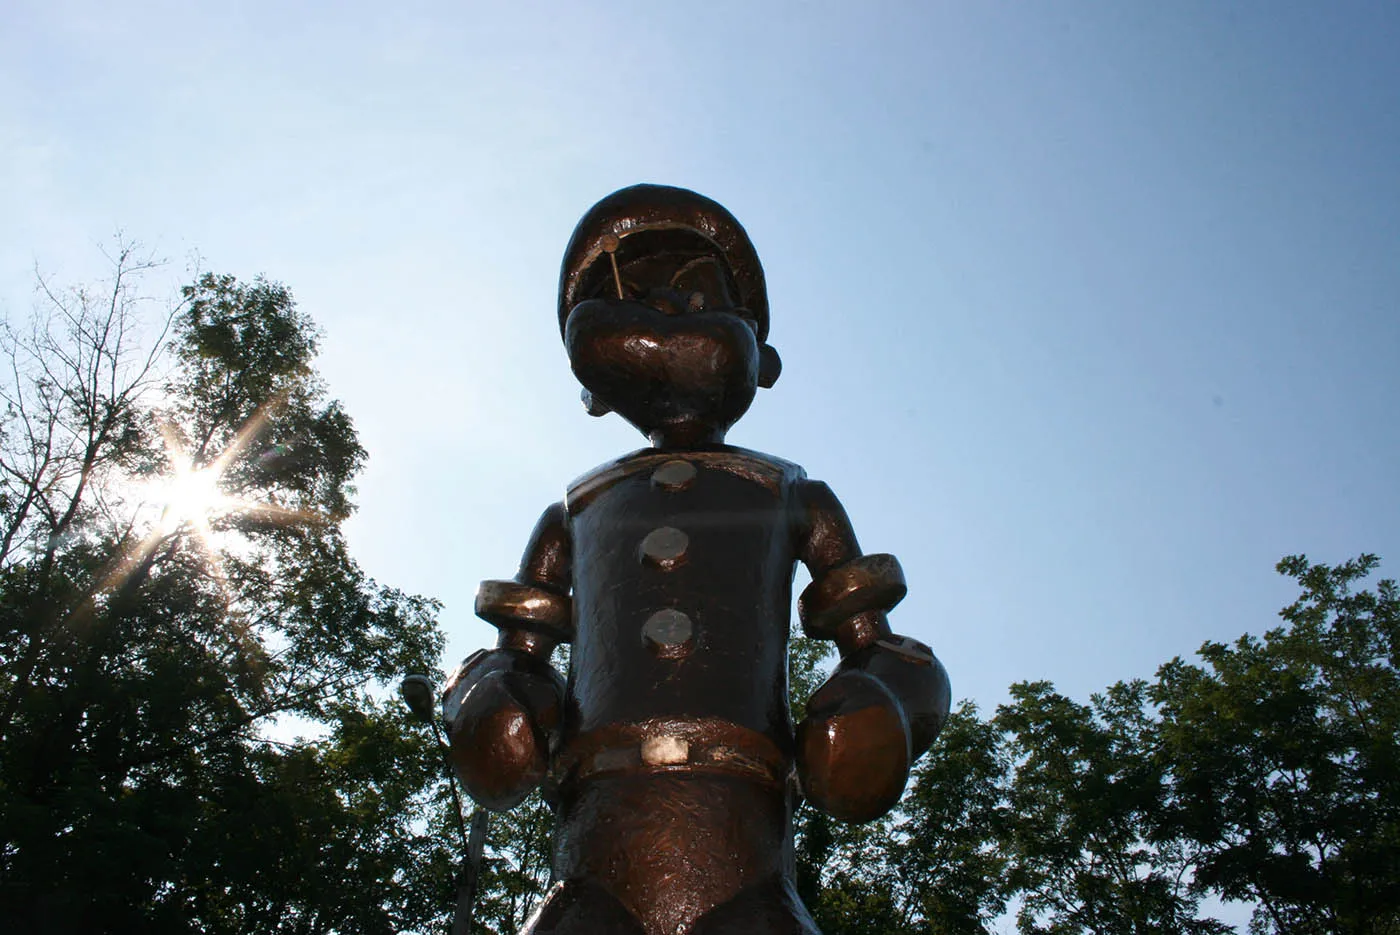 Best Illinois roadside attractions: Popeye statue in Chester, Illinois, the Home of Popeye the Sailor Man. Visit this roadside attraction on an Illinois road trip with kids or weekend getaway with friends. Add the Popeye statue to your road trip bucket list and visit them on your next travel adventure.